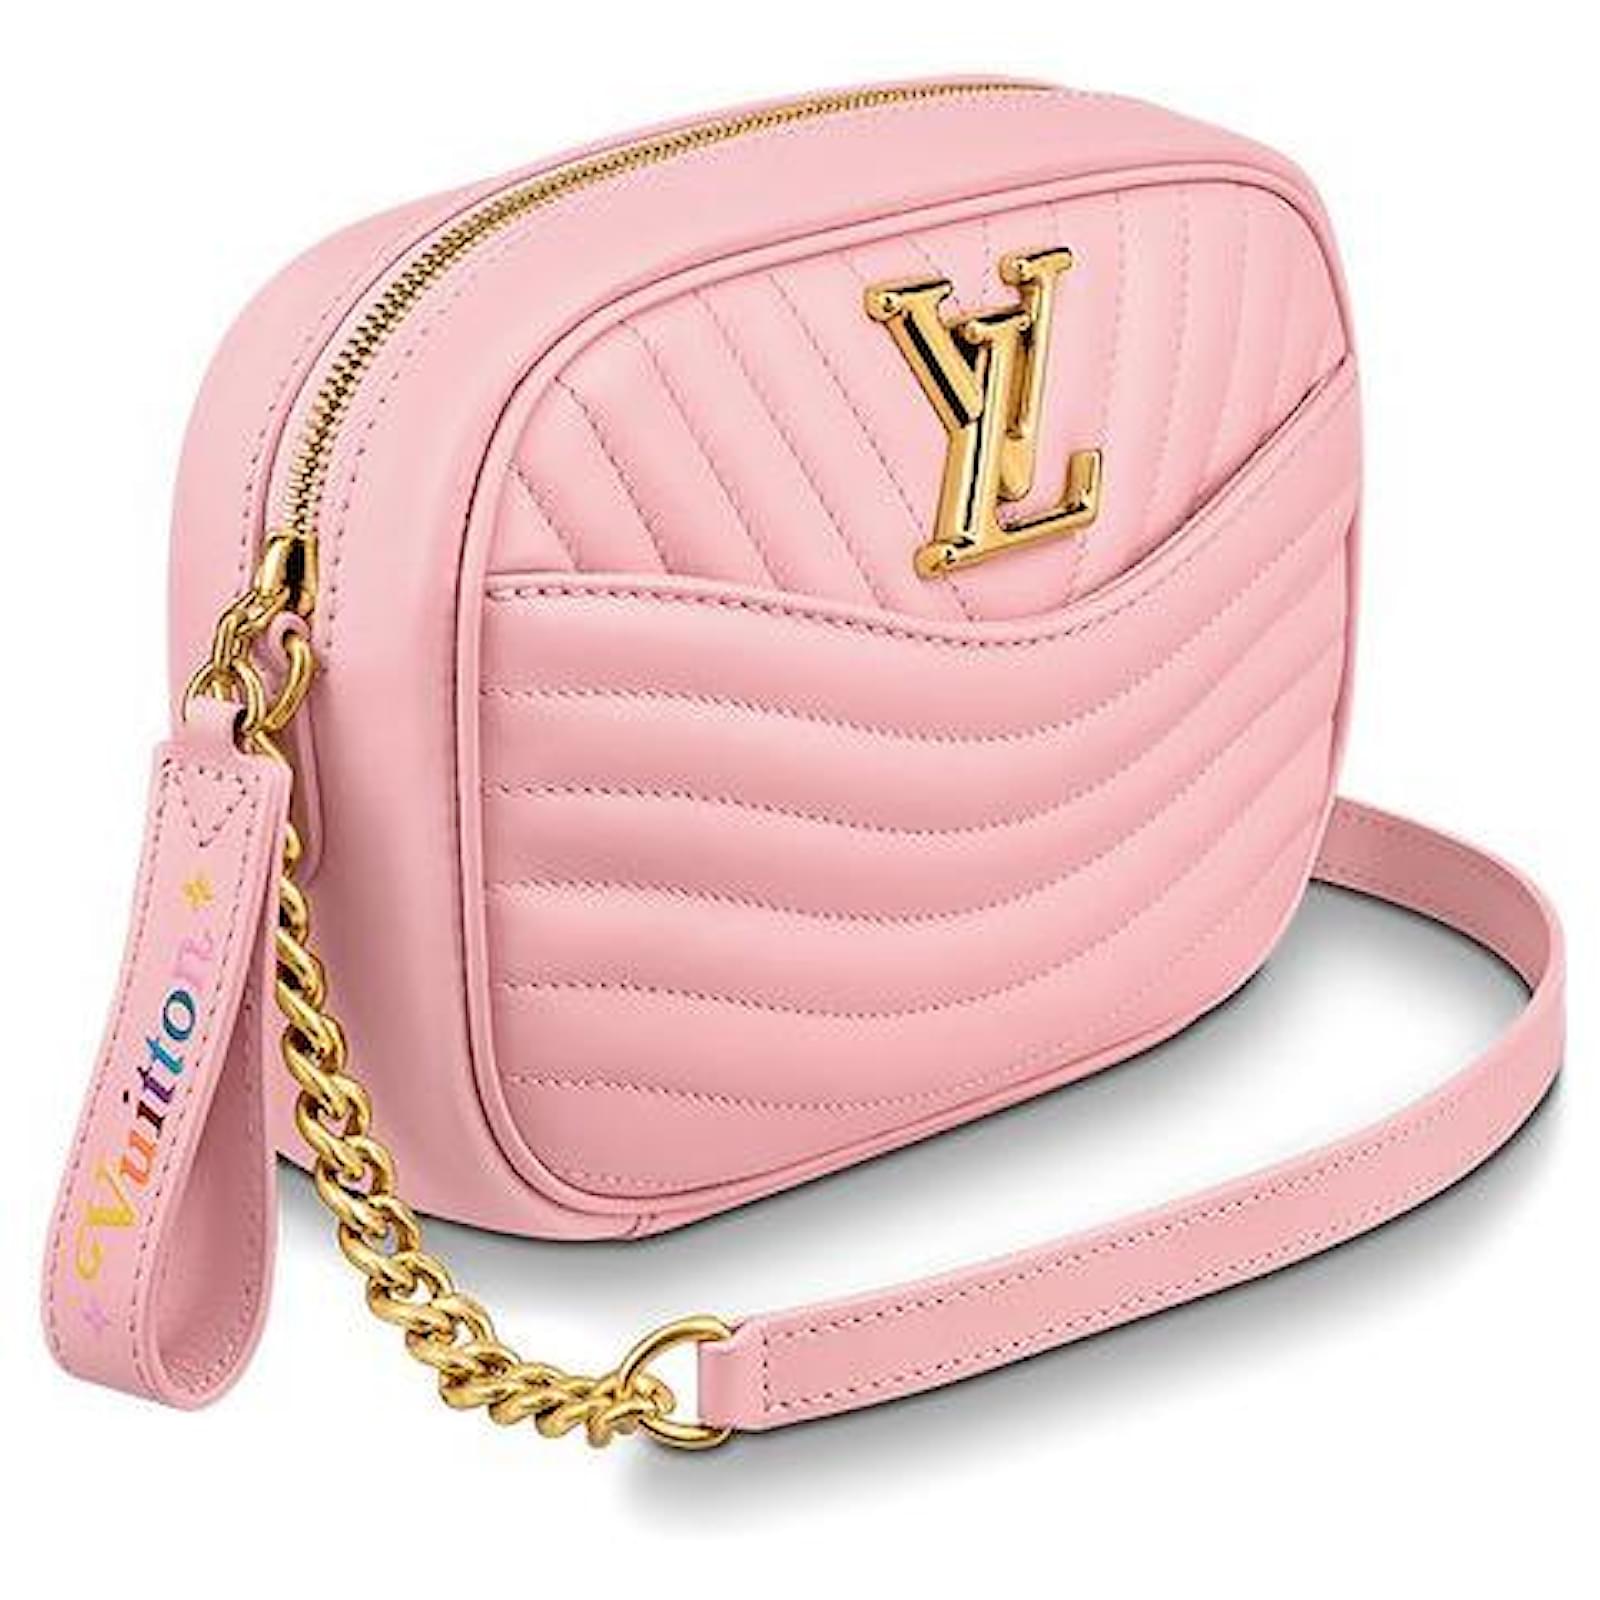 Louis Vuitton New Wave Camera Bag in Pink